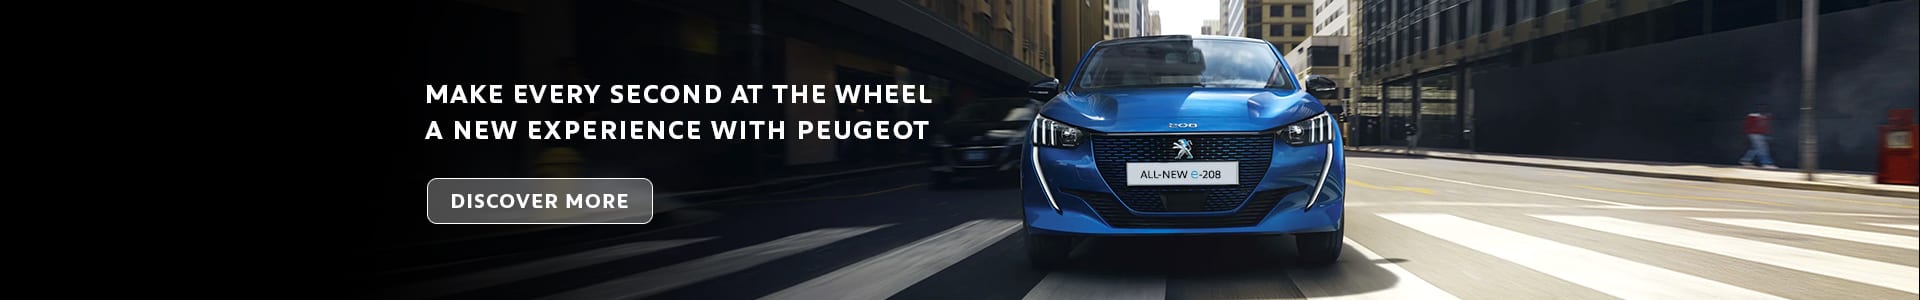 Discover the new Peugeot Range